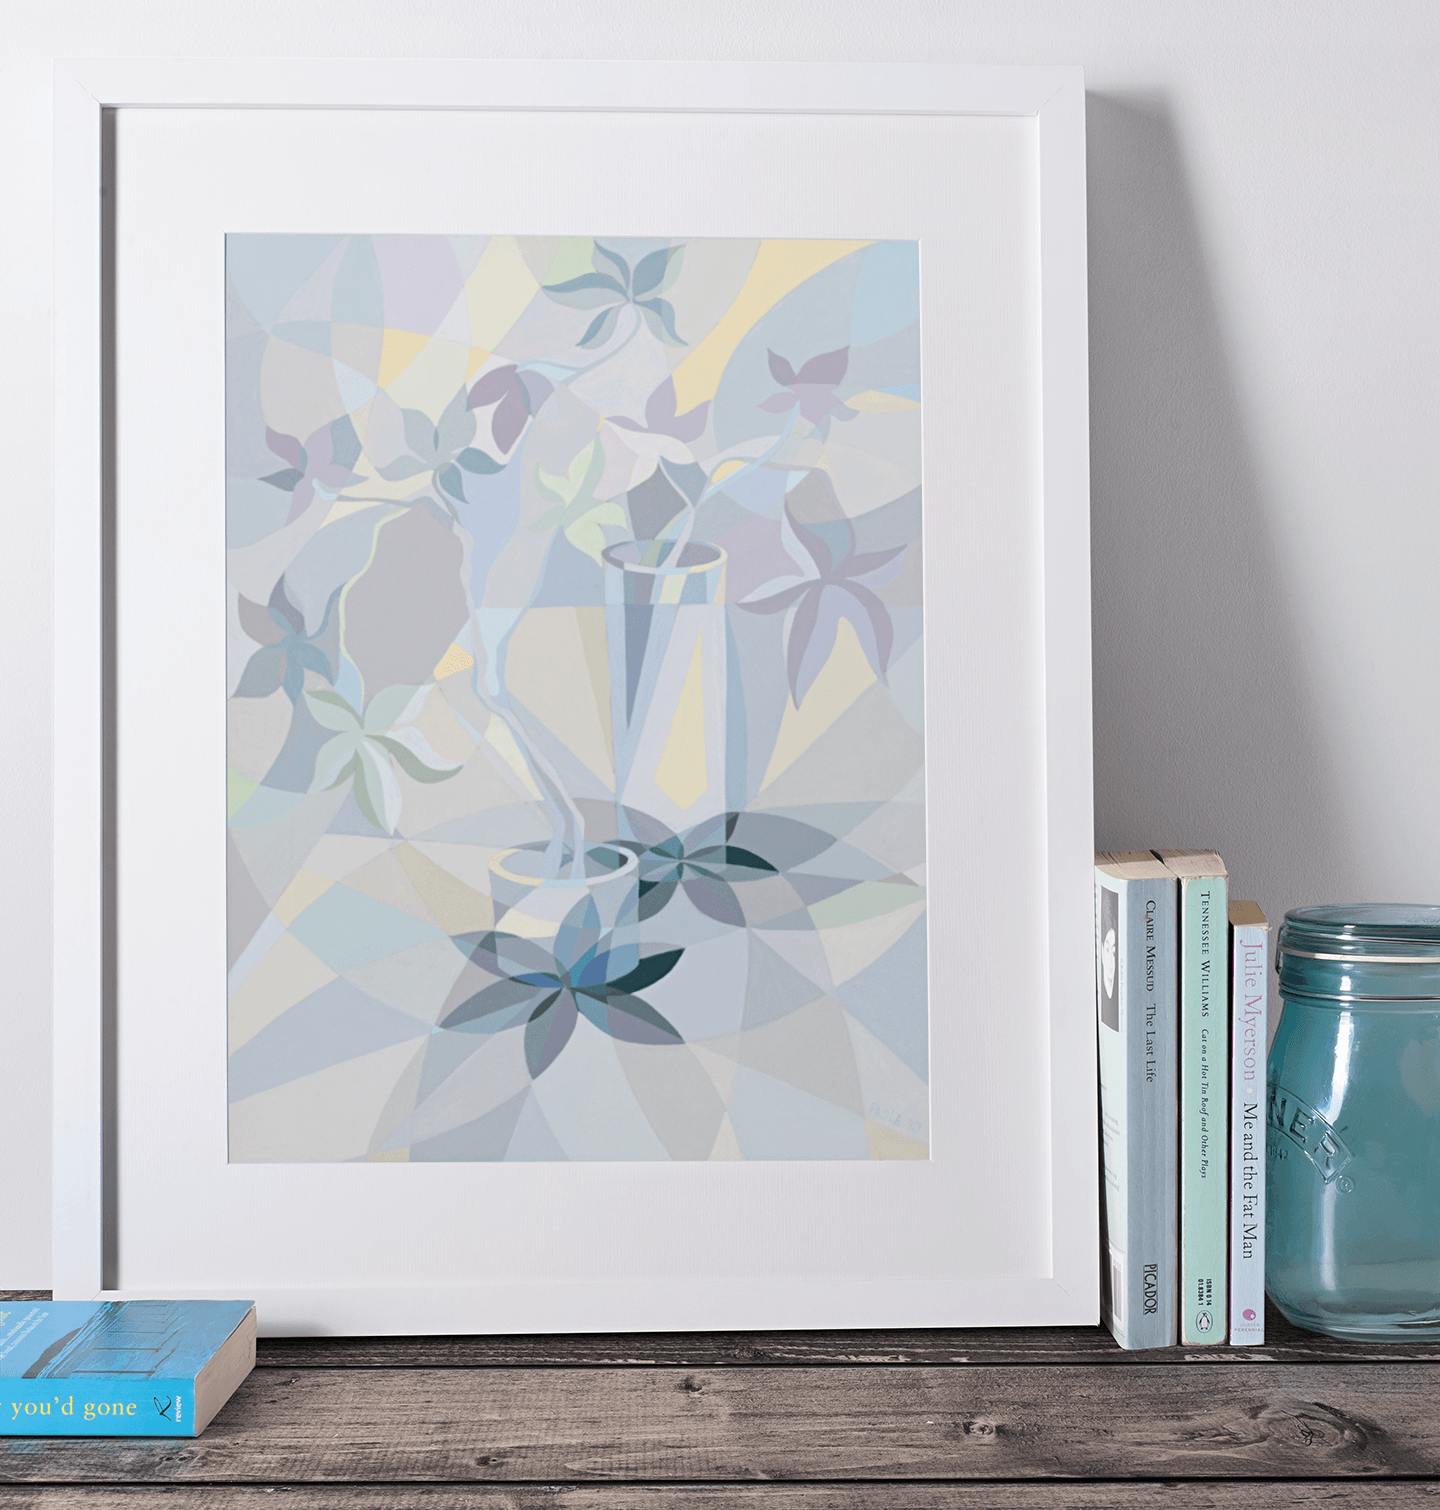 Still Life with Orchids, Art Print by Paola Minekov - Lantern Space